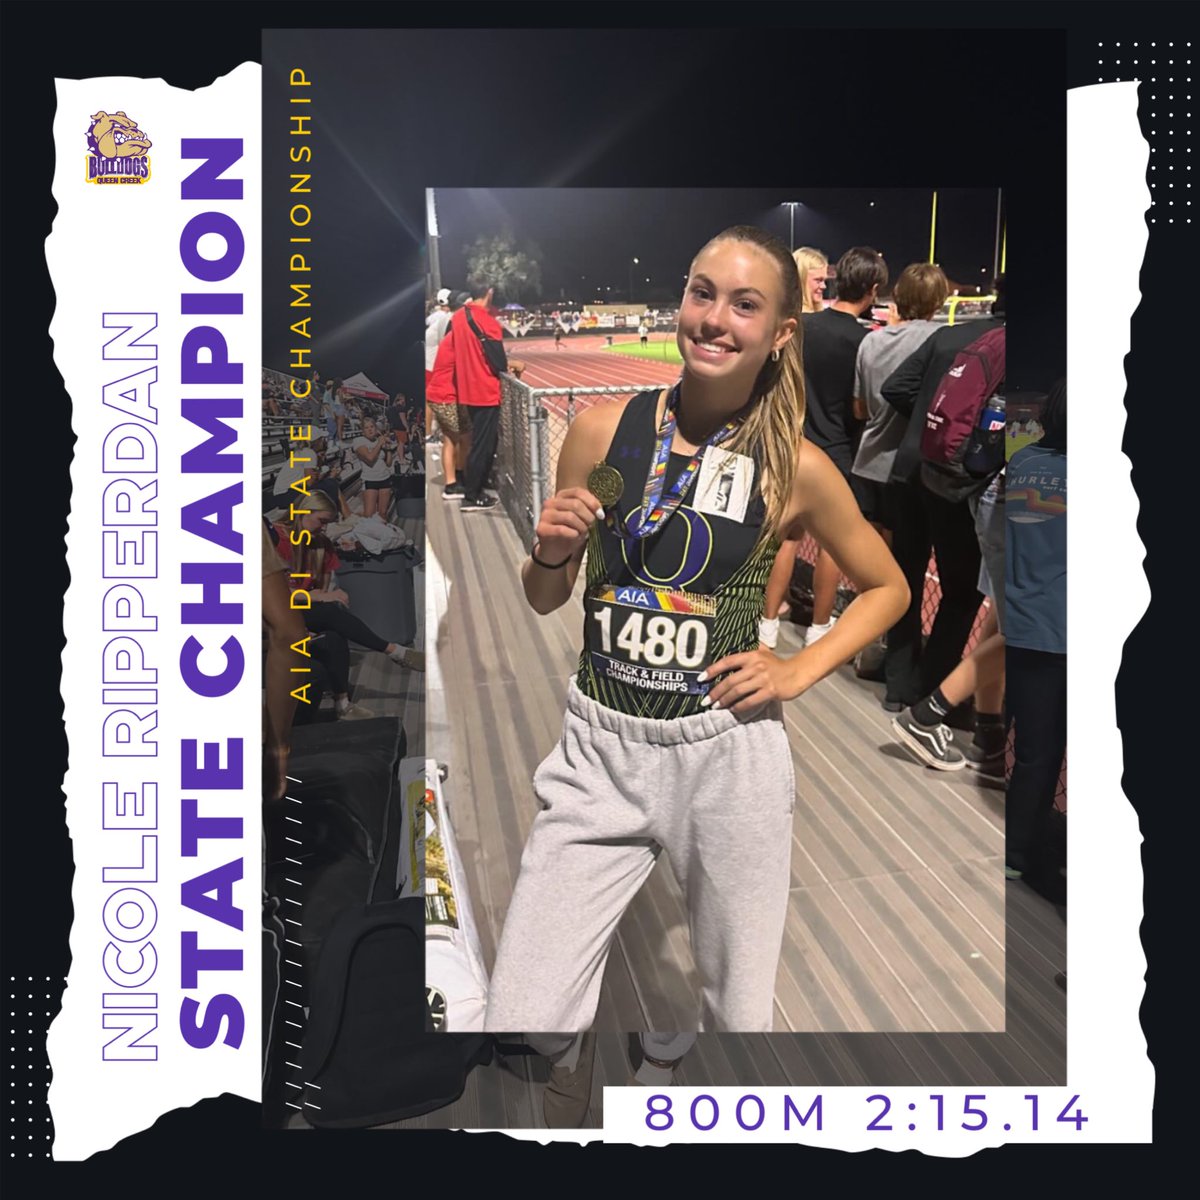 Nicole Ripperdan is a STATE CHAMPION in the 800M! Congrats Nicole!! #qcusd #QCleads @QCUSD_Athletics